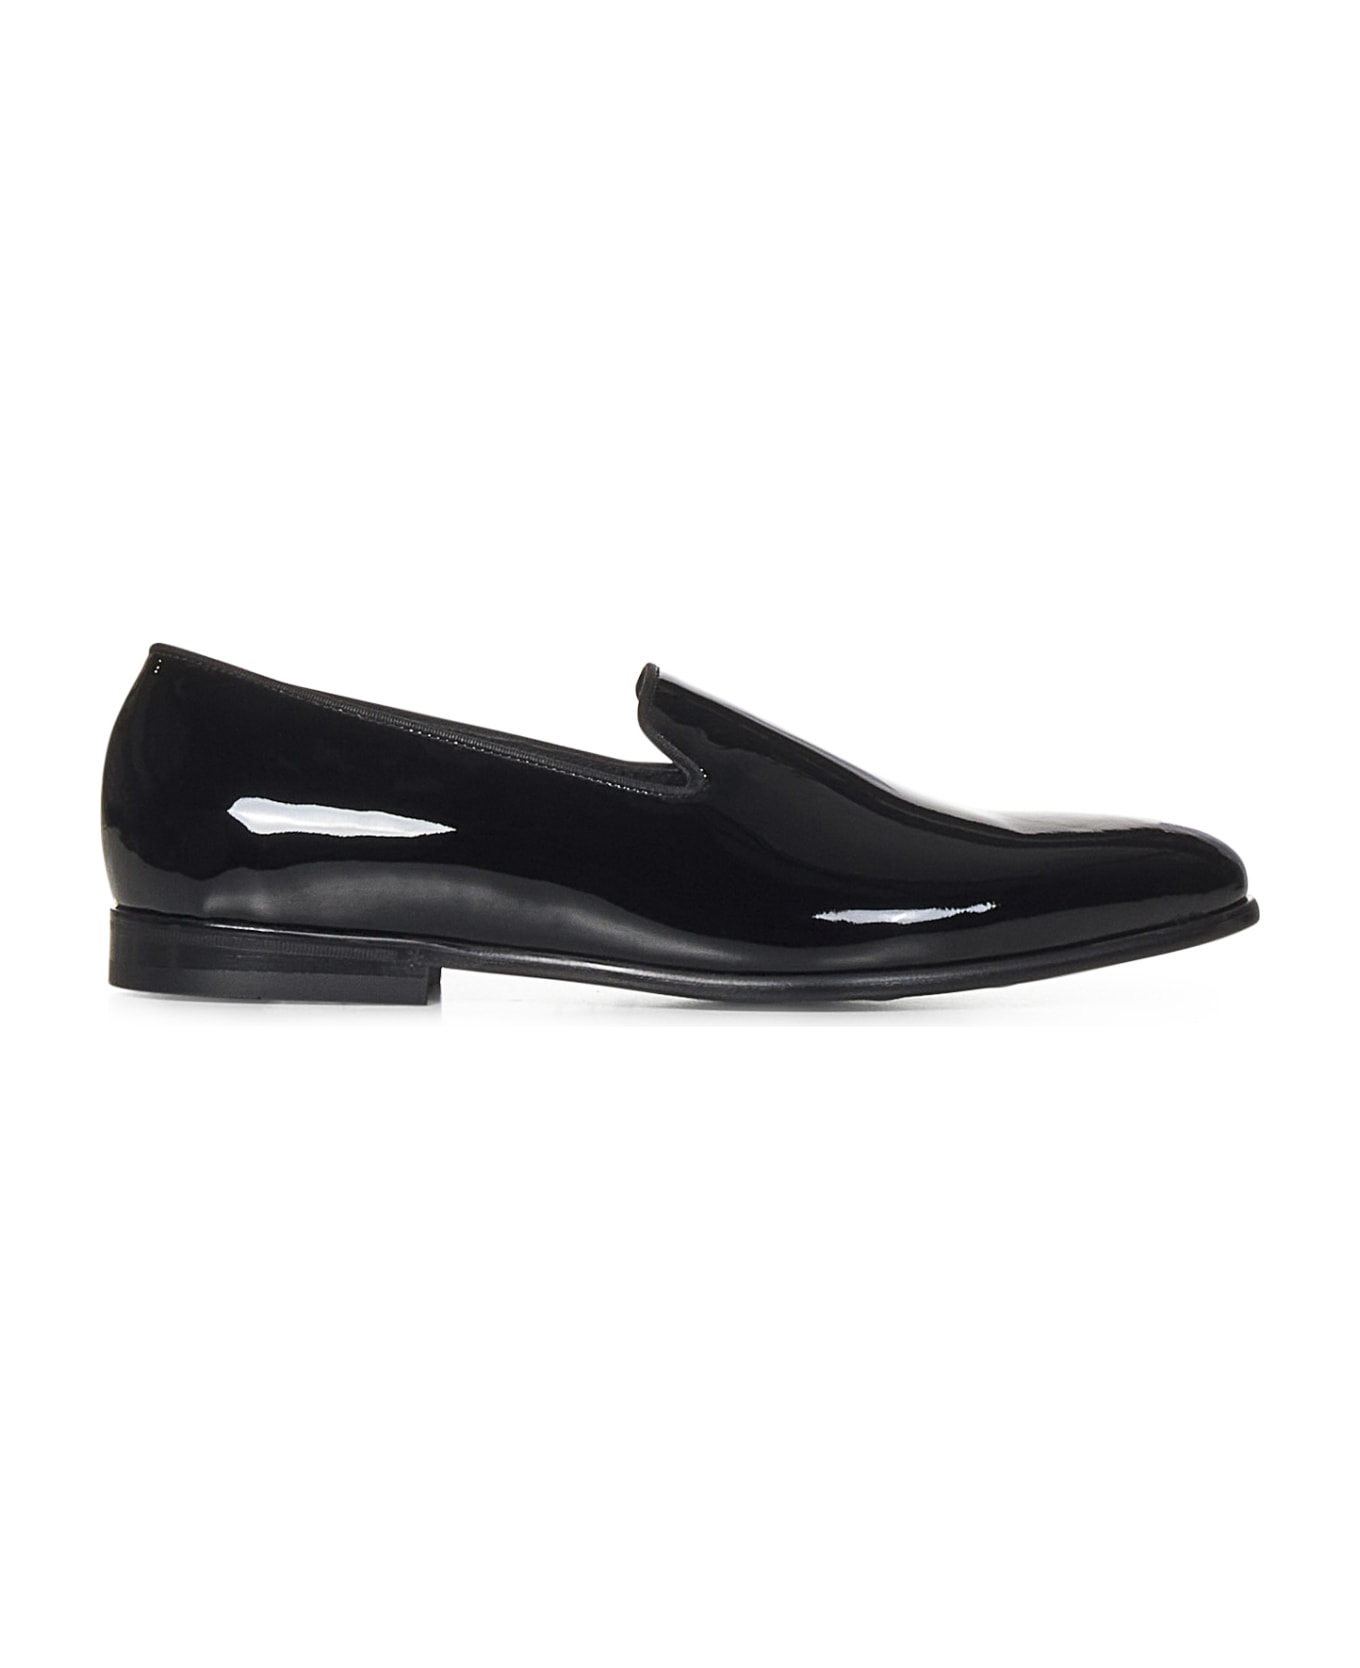 Doucal's Loafers - Black